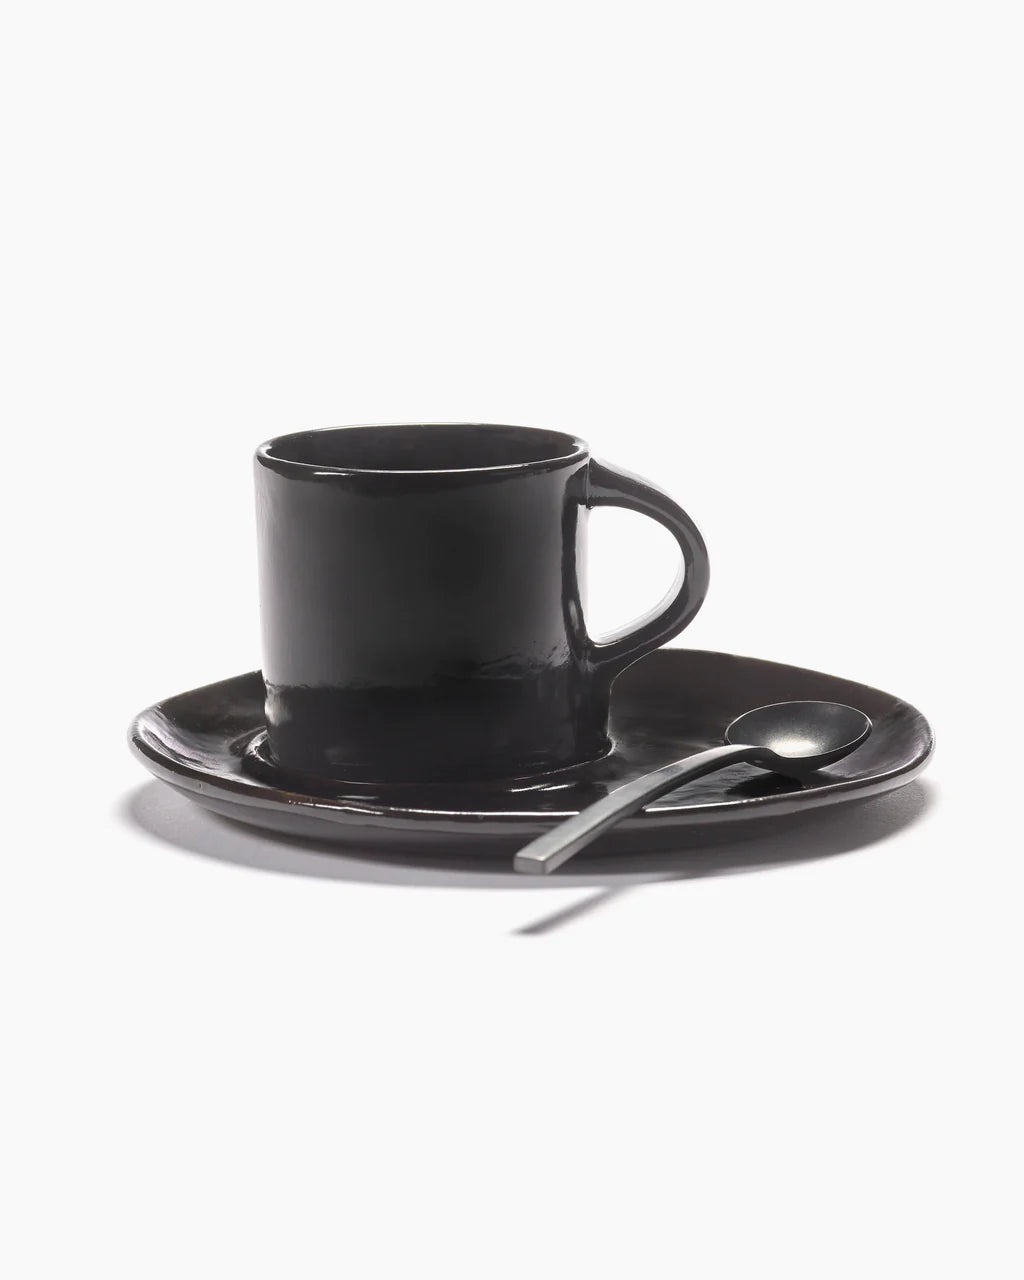 Ebony Saucer for Coffee Cup